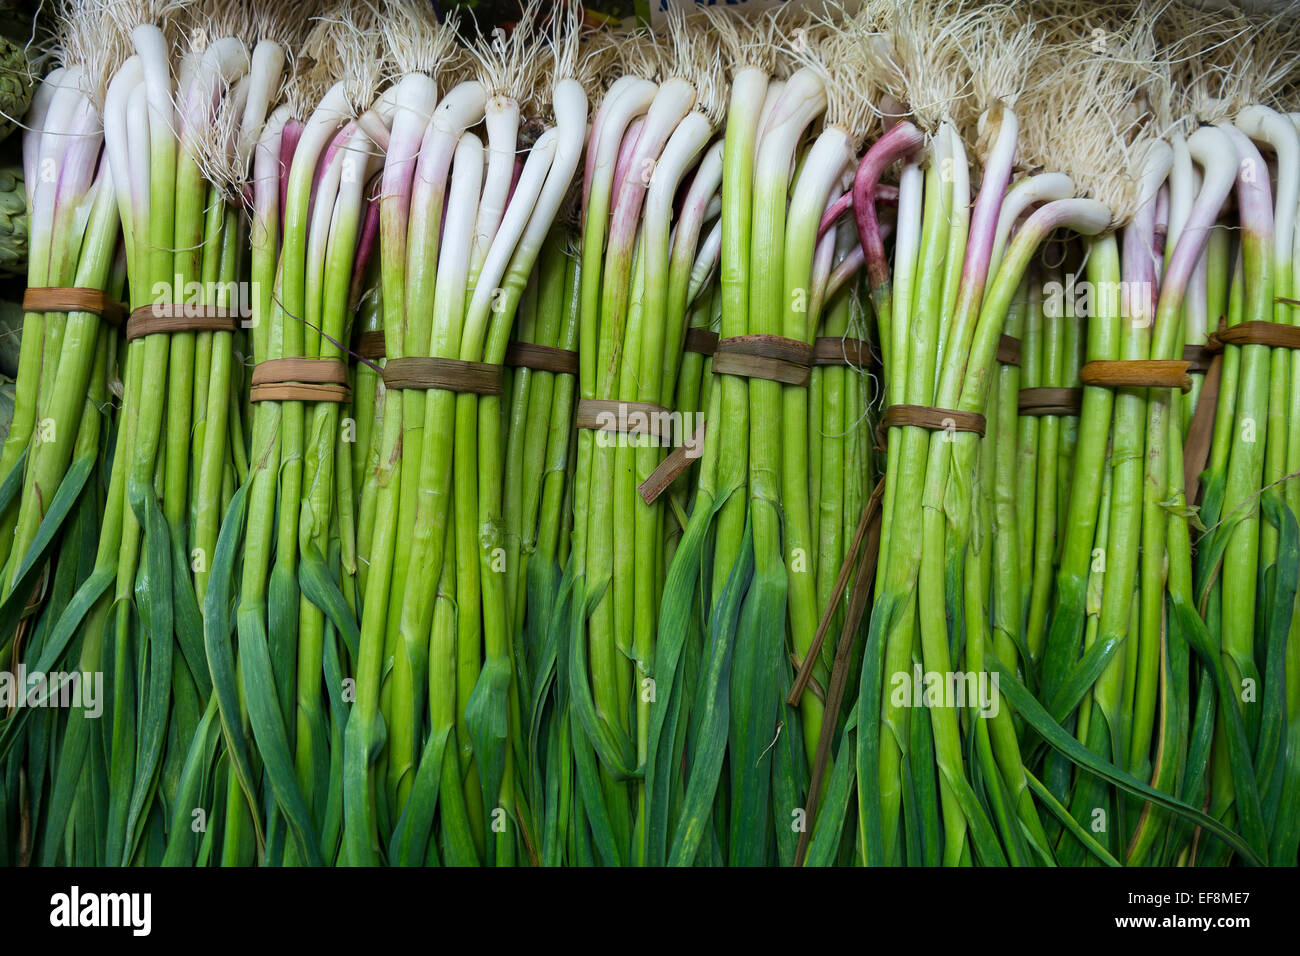 Bunch of spring onions Stock Photo